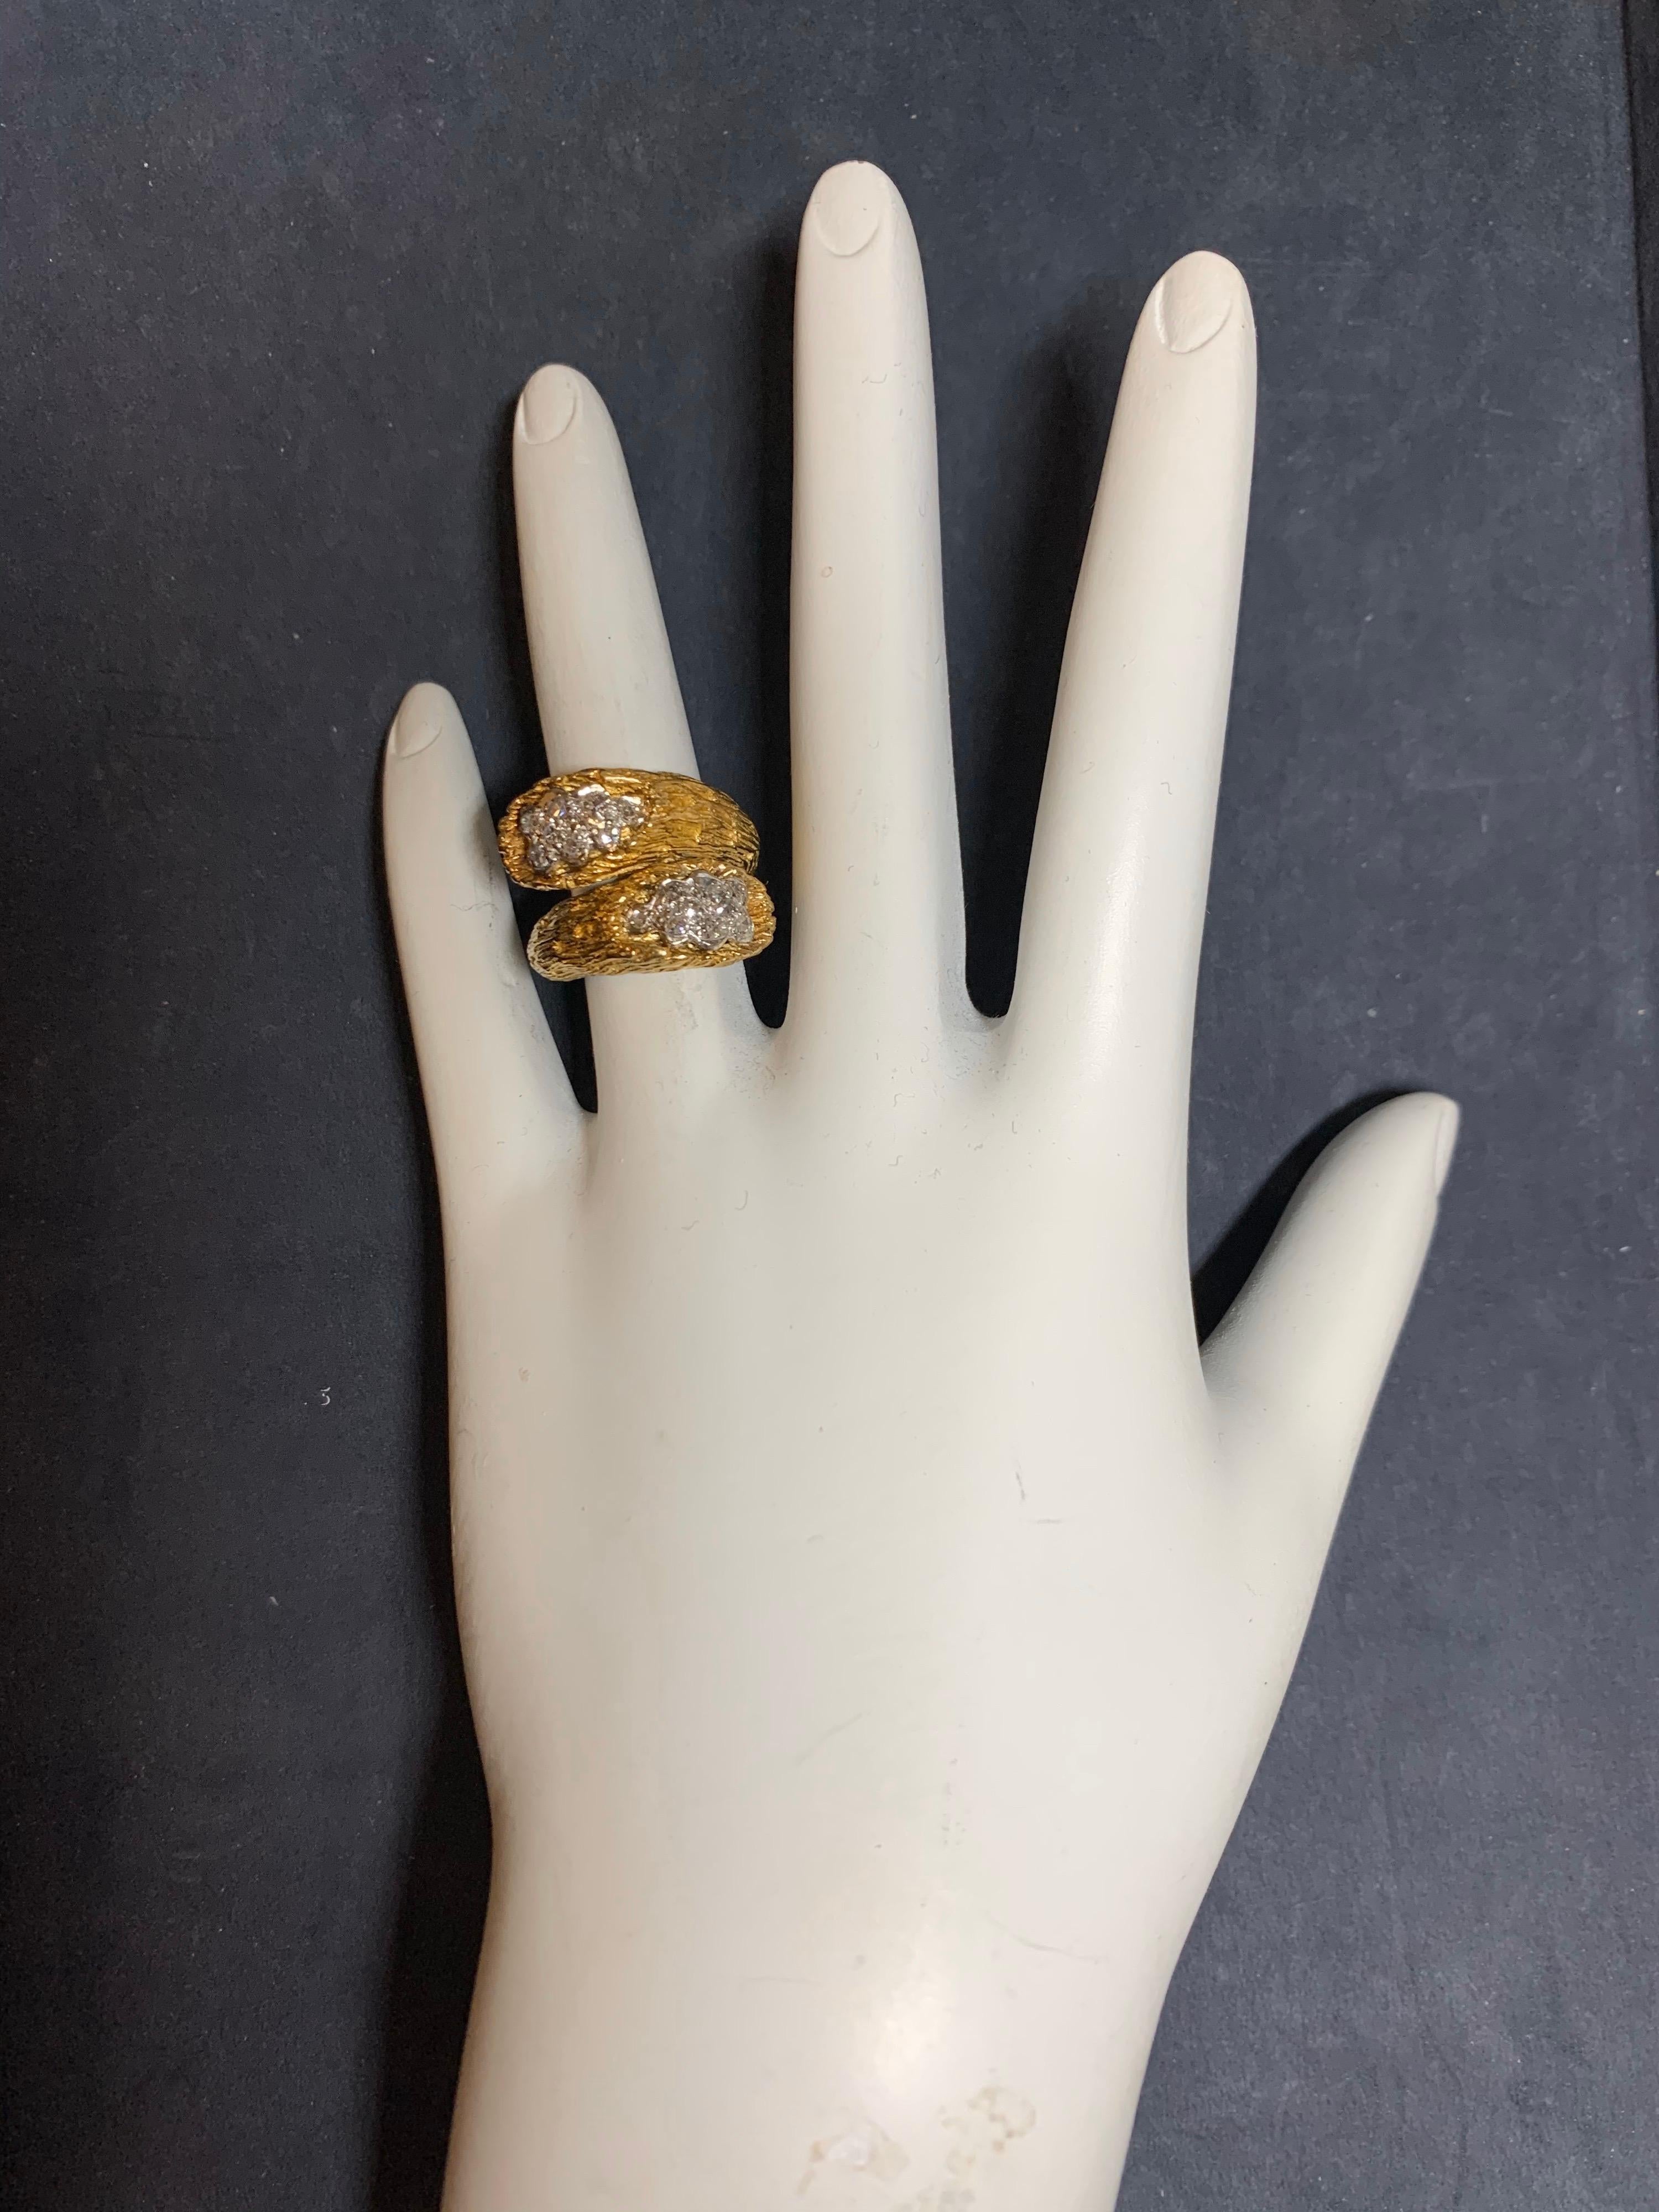 Retro Yellow Gold Cocktail Ring. It weighs 10.5 grams and is a size 4.5.

The 18 Natural Colorless Round Single Cut Diamonds (VS clarity) weigh 0.35 carats.

Circa 1950. 

Condition is Pre-owned. 